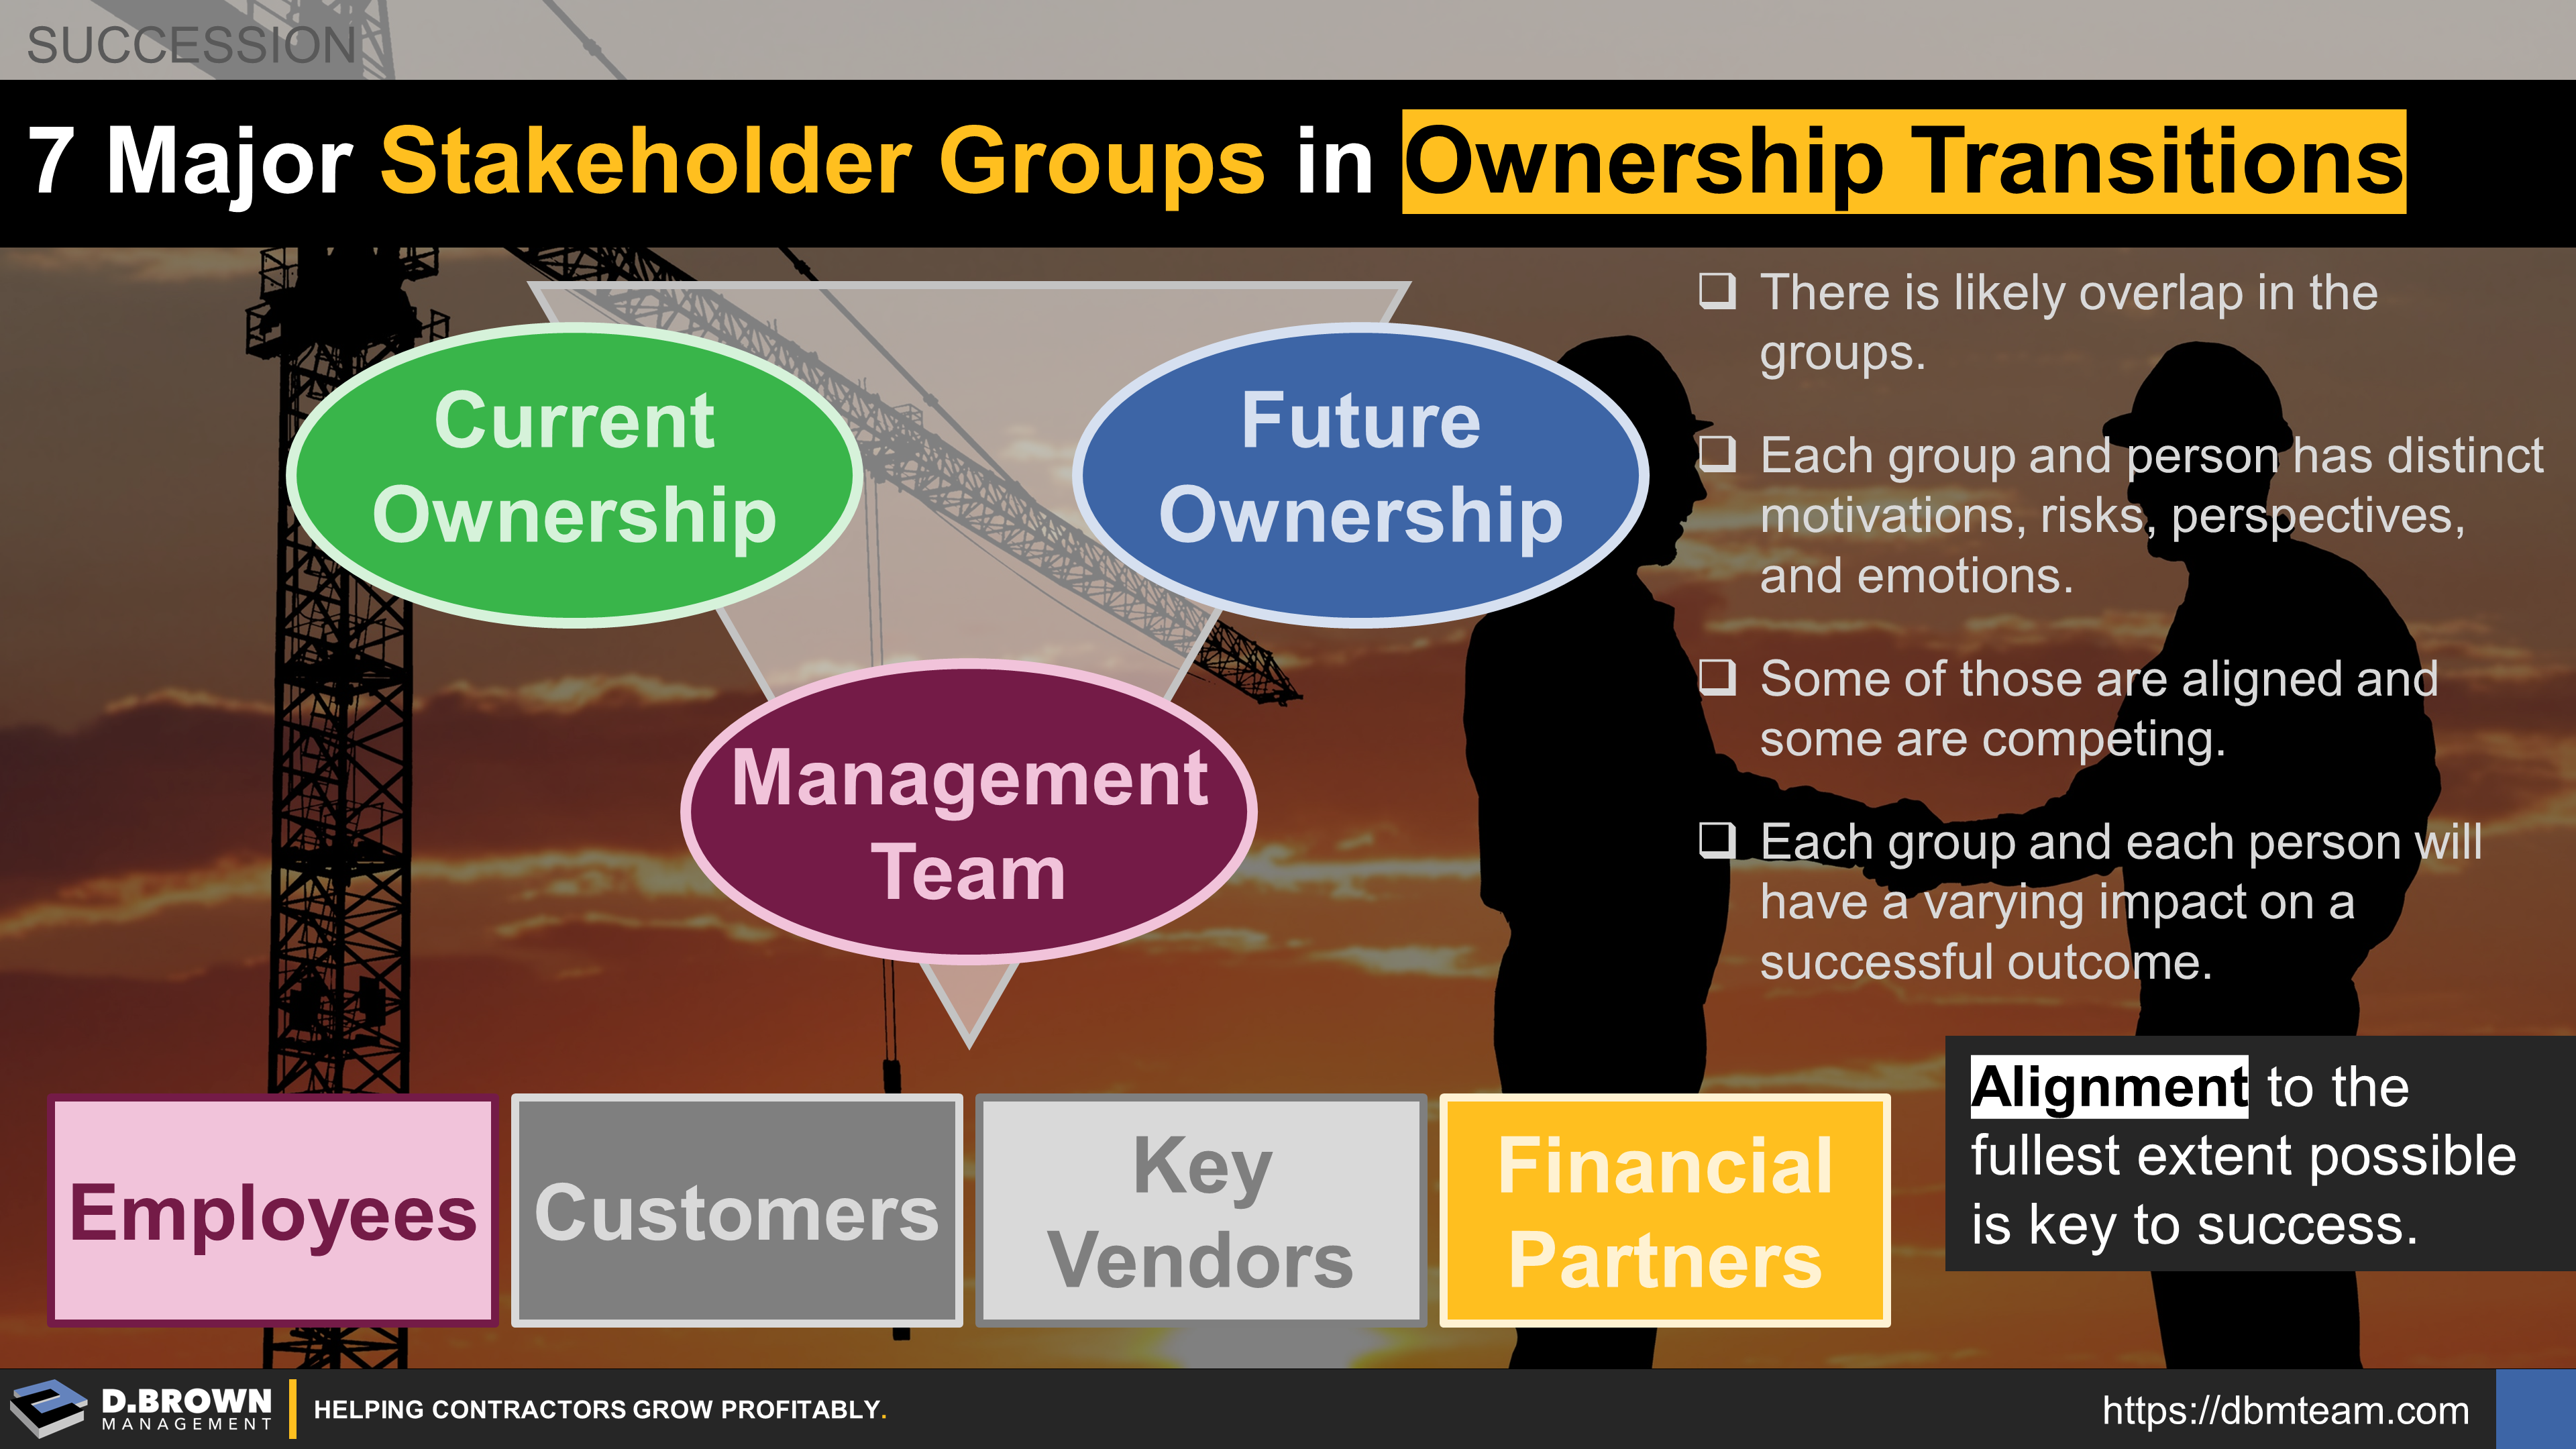 https://dbmteam.com/media/u2pmeduf/7-major-stakeholder-groups-in-ownership-transitions.png